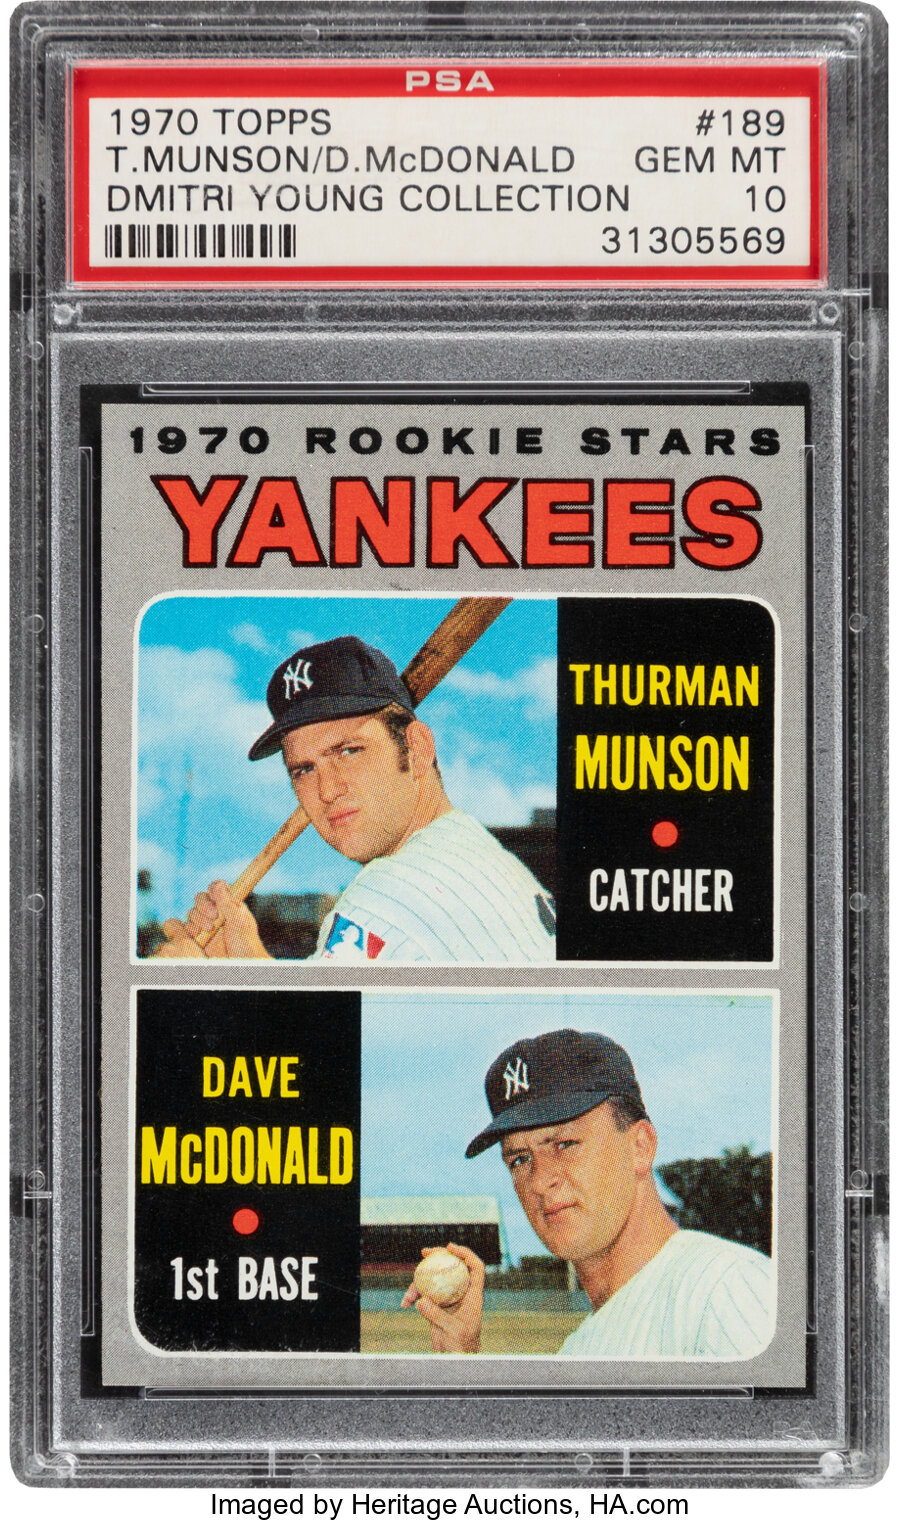 1970 Topps Yankees Rookies Thurman Munson #189 PSA Gem Mint 10--Dmitri Young Collection